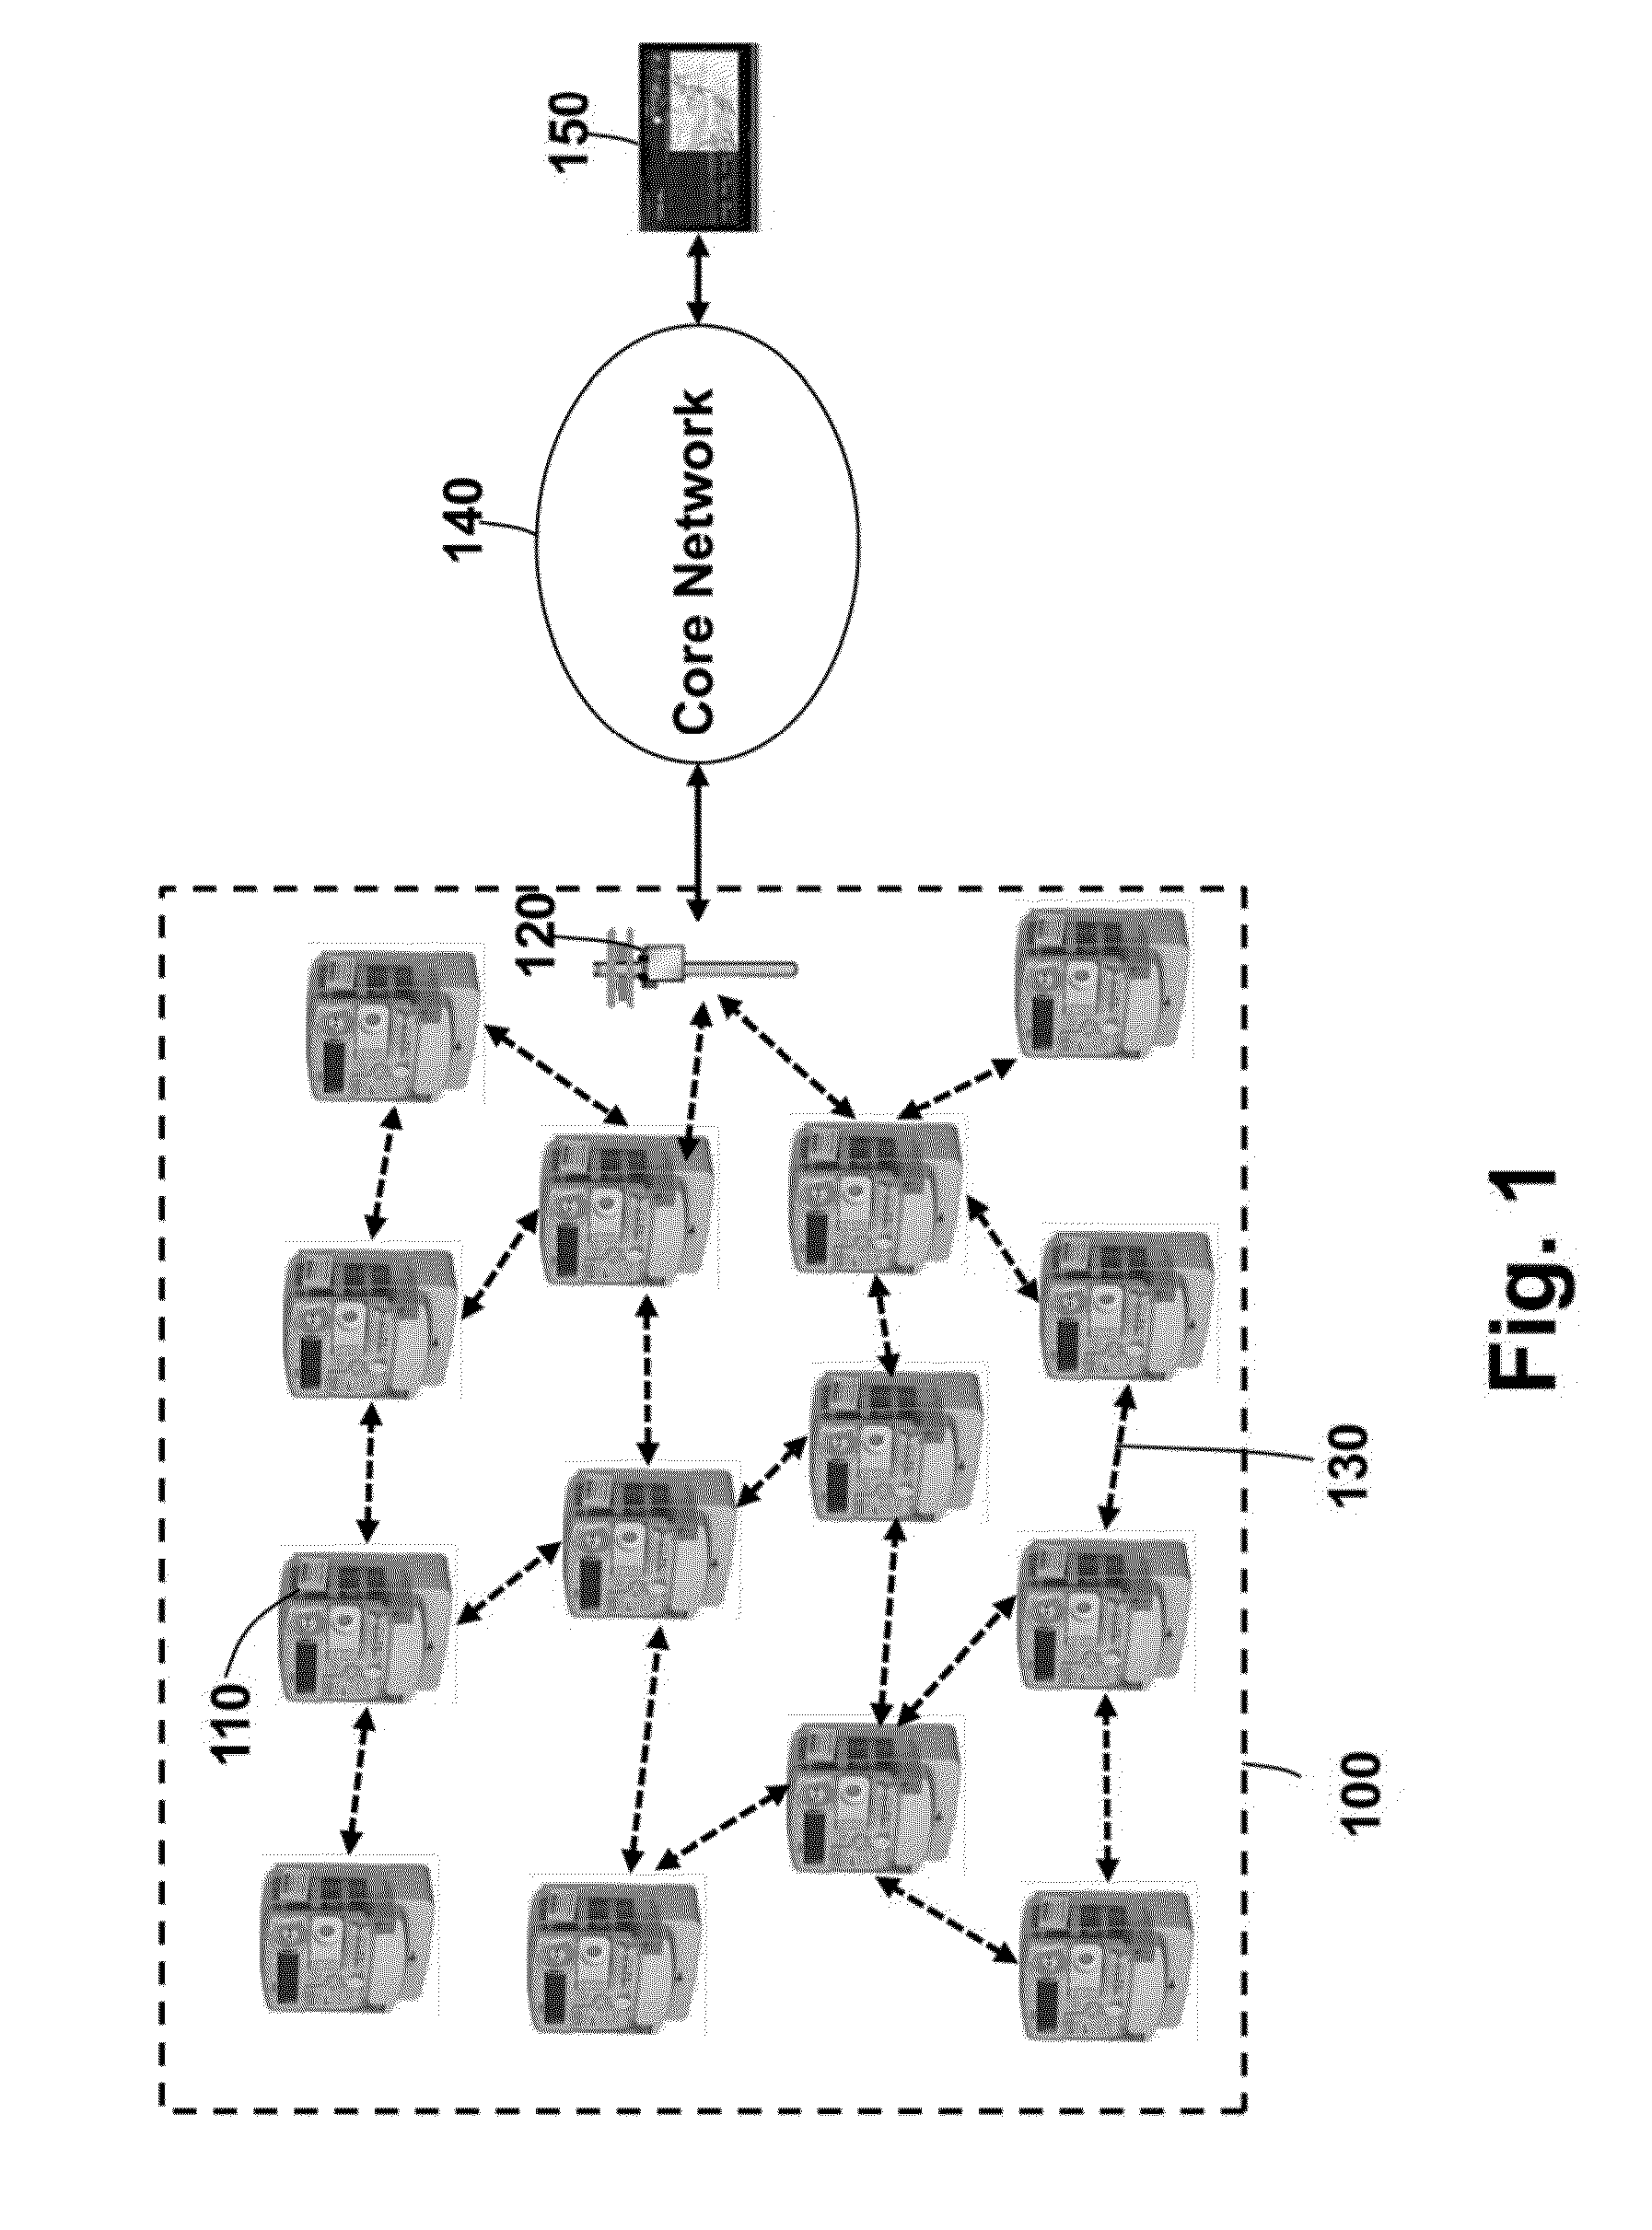 Method for Discovering Neighboring Nodes in Wireless Networks